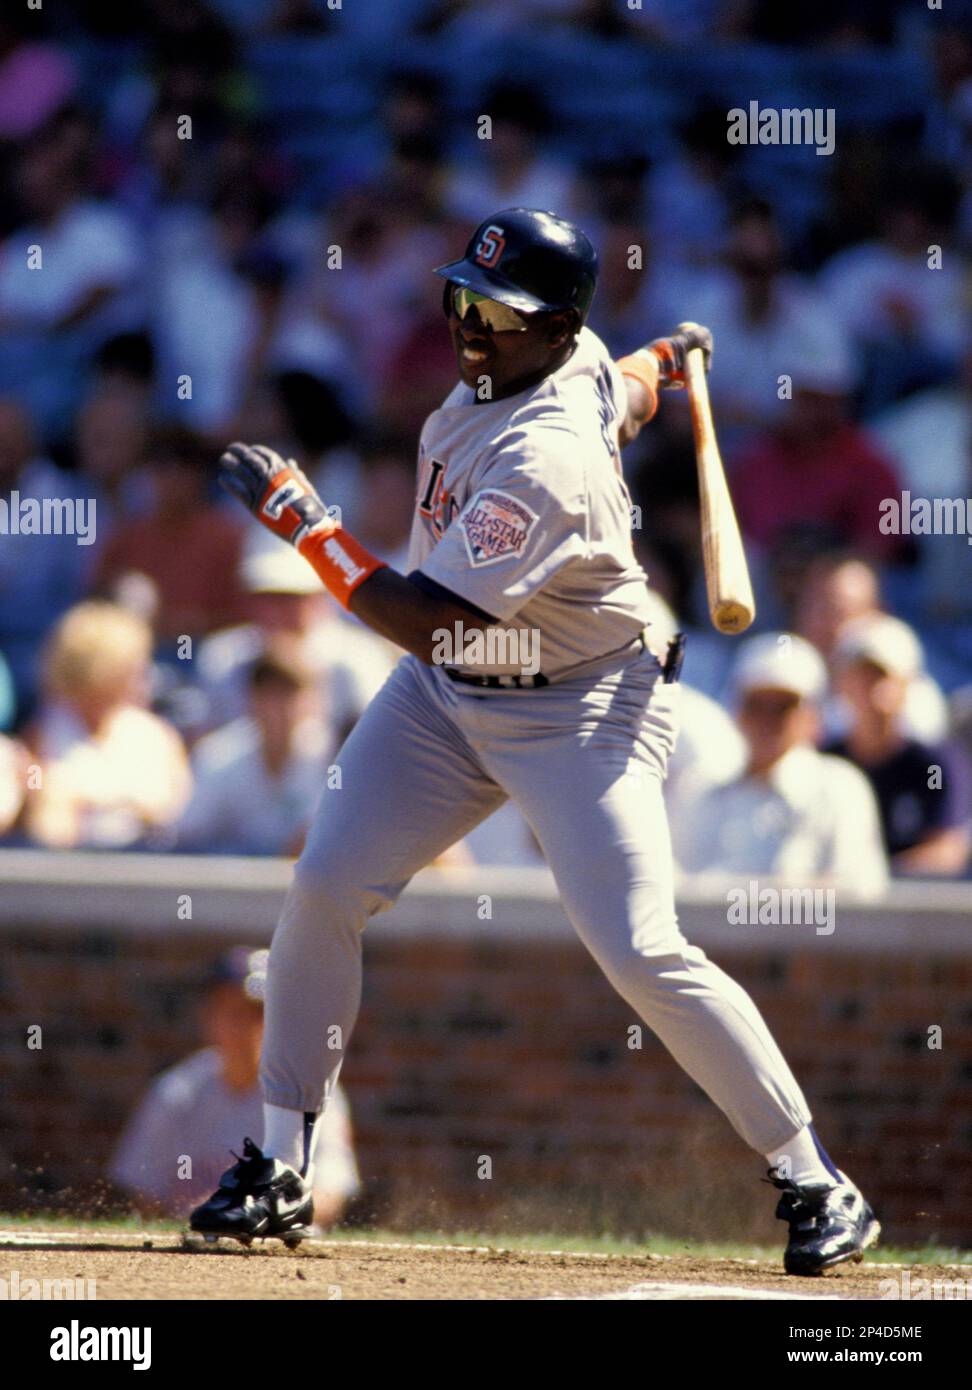 Tony Gwynn of the San Diego Padres bats against the Chicago Cubs